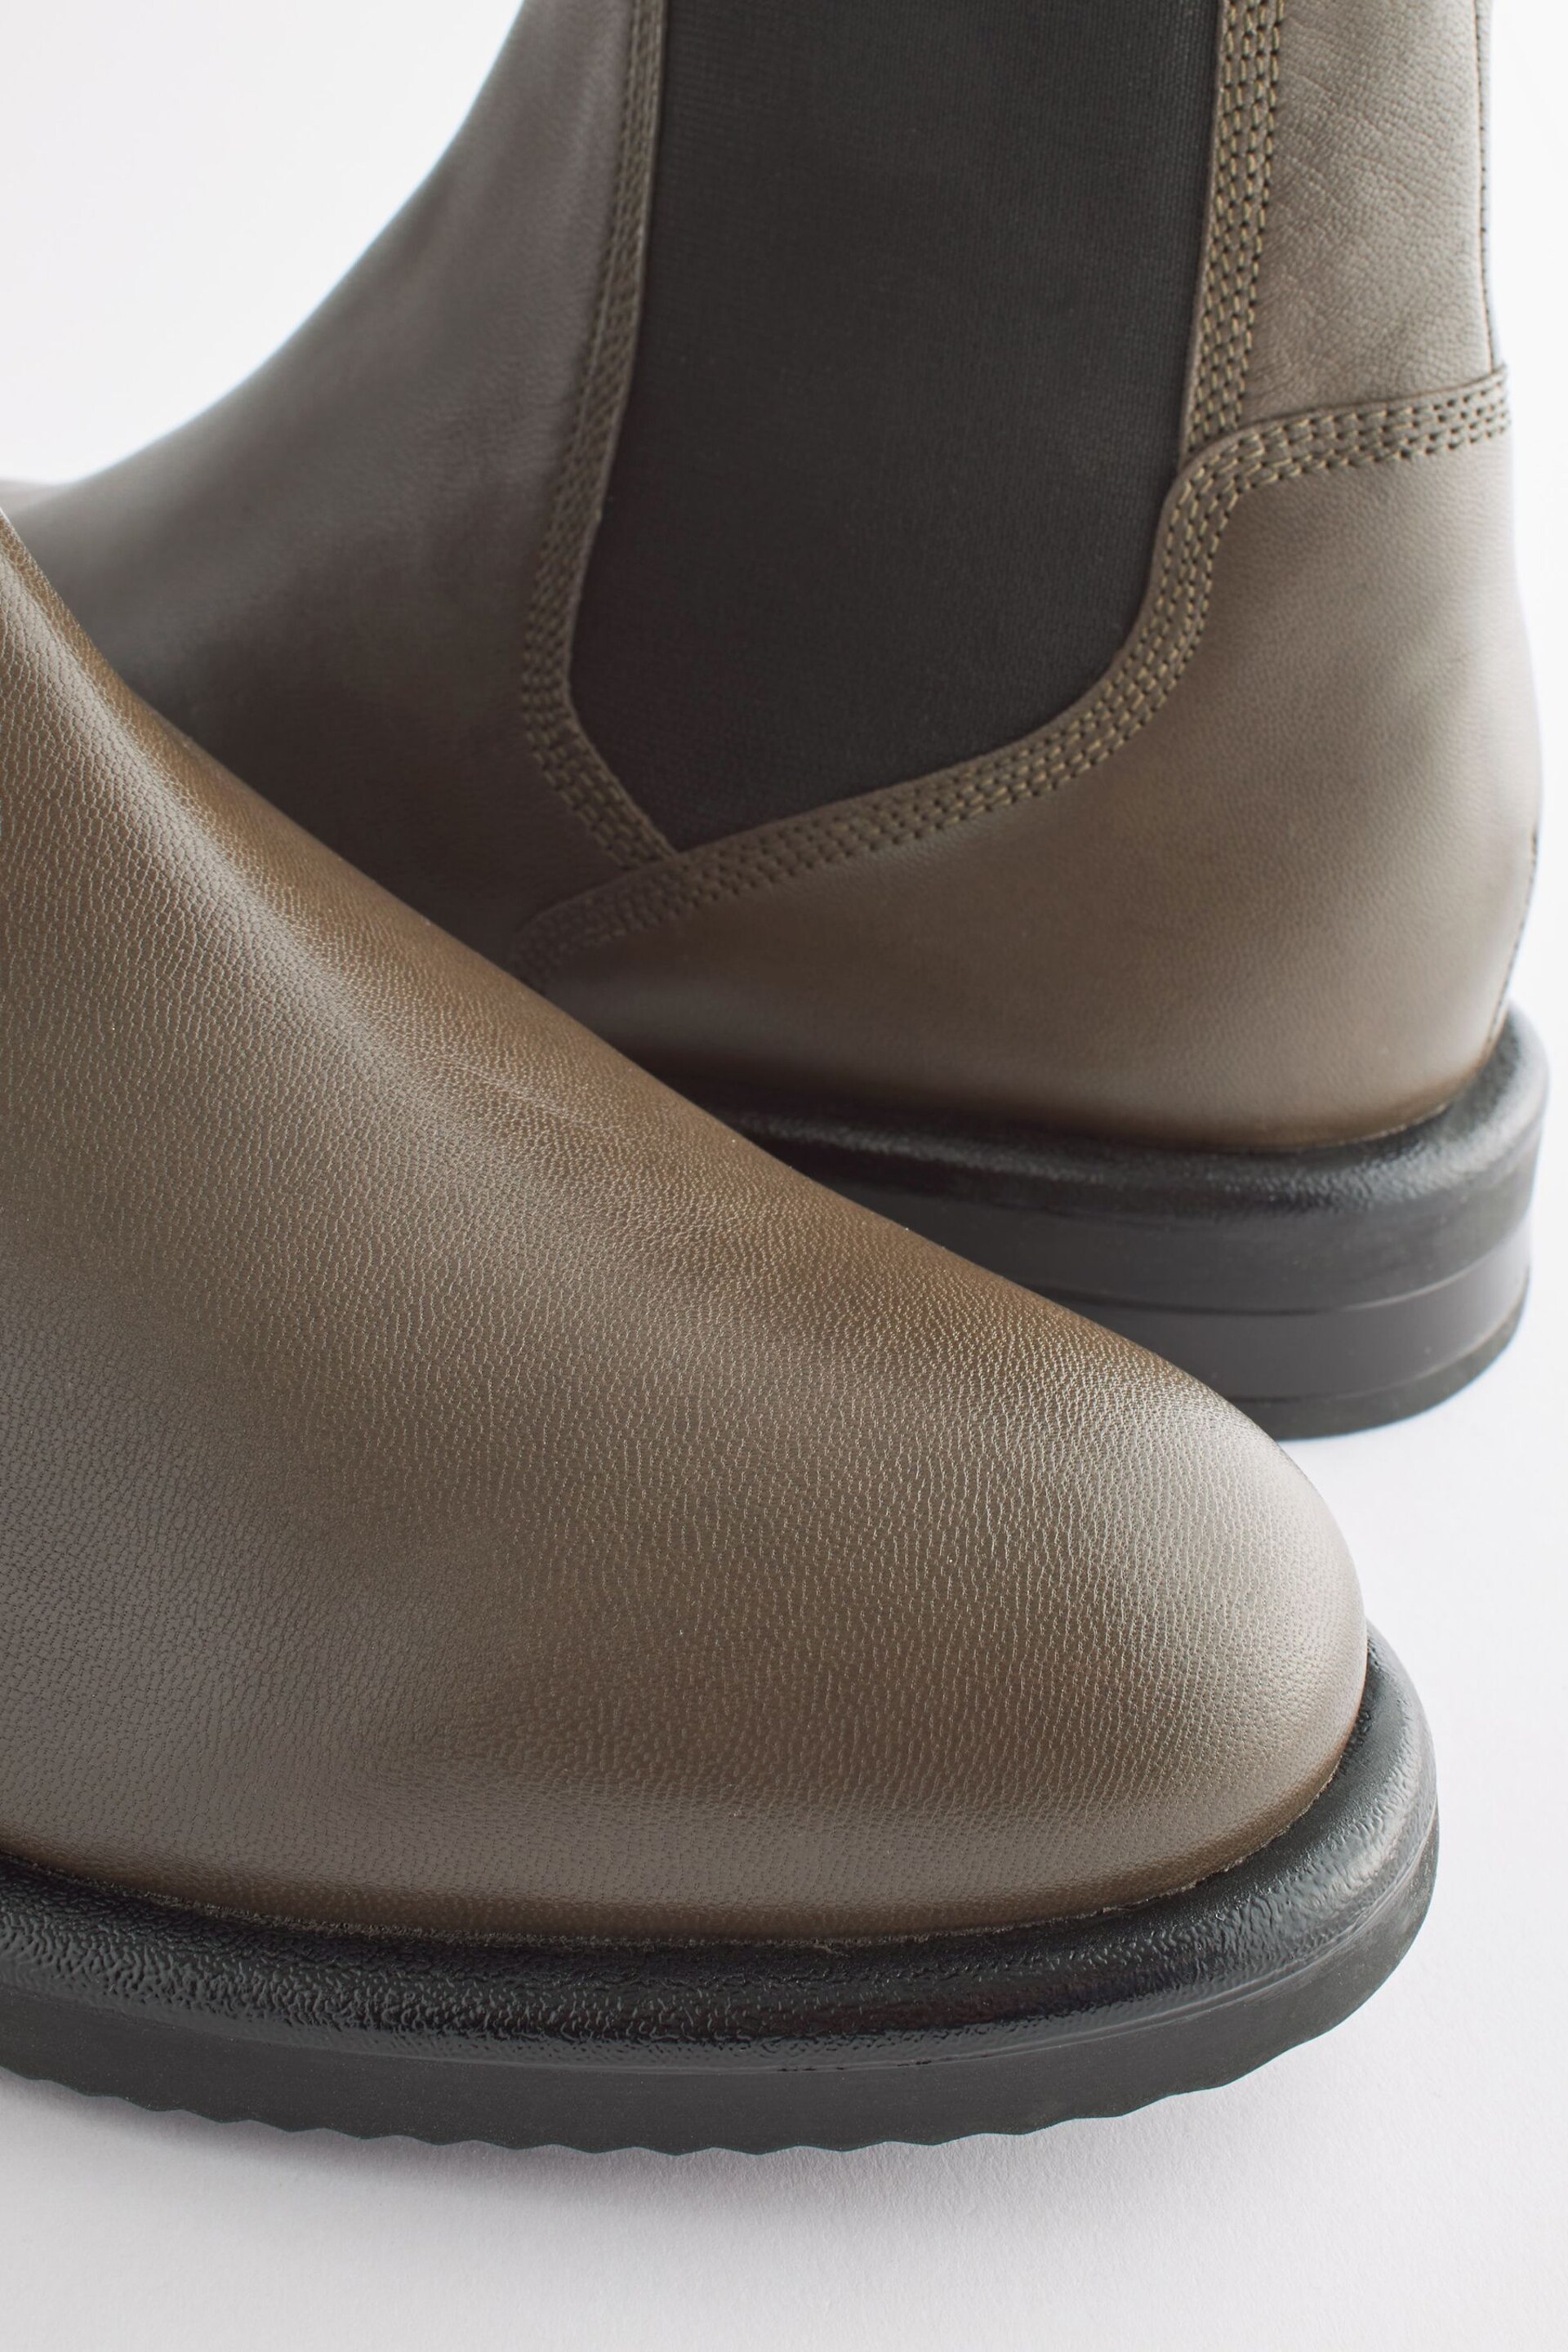 Khaki Green Extra Wide Fit Forever Comfort® Leather Chelsea Boots - Image 4 of 5